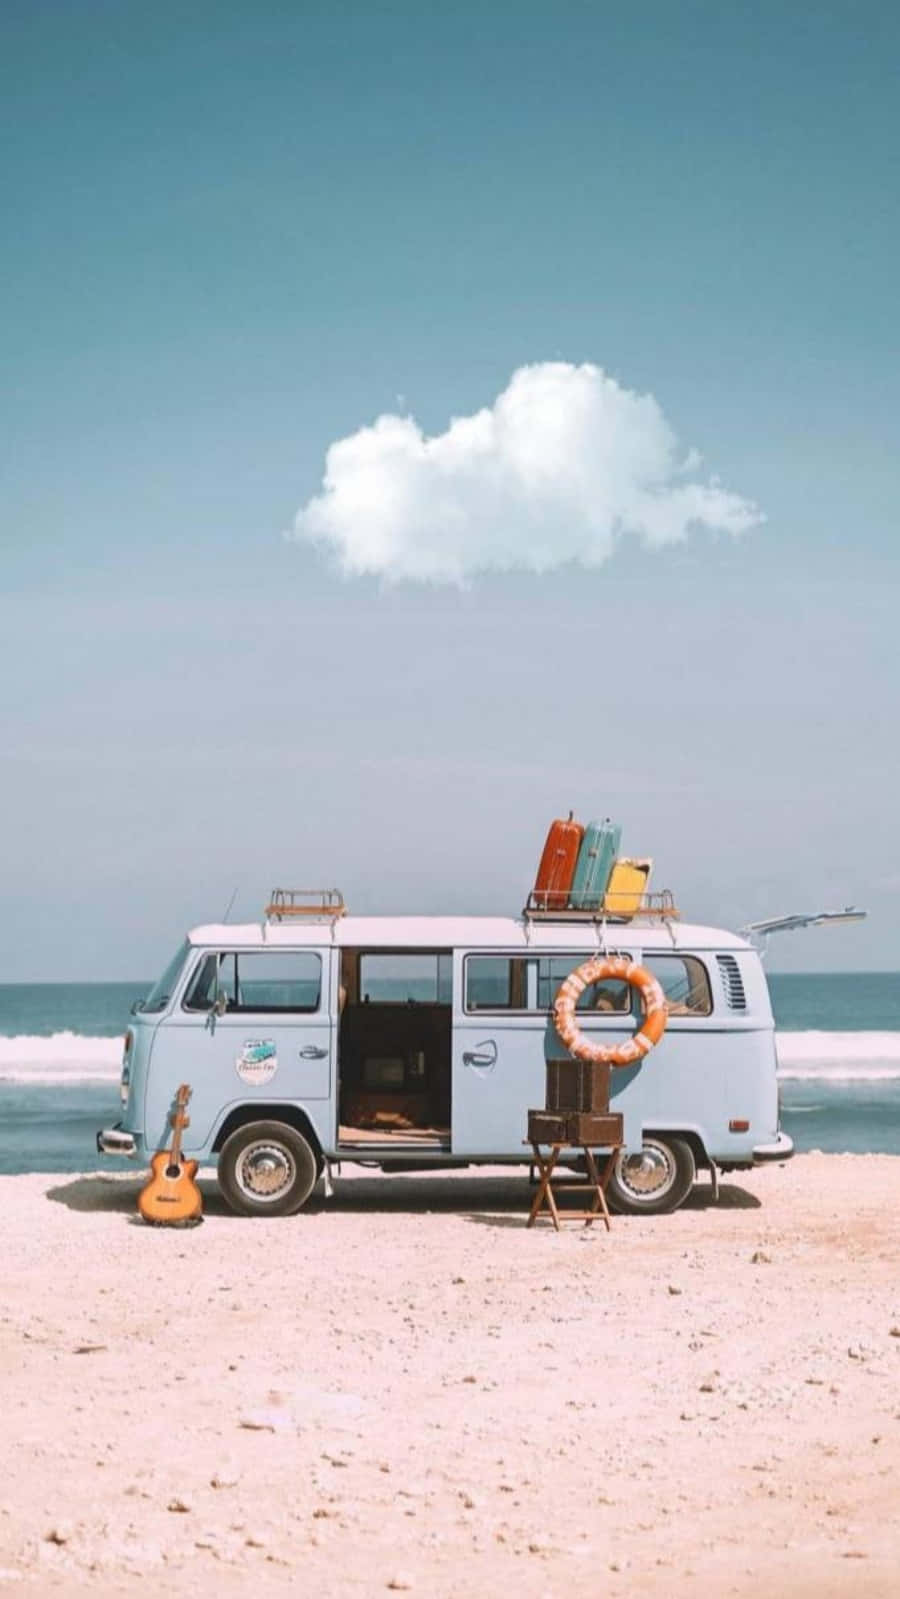 Get out and explore the world with a trusty Van